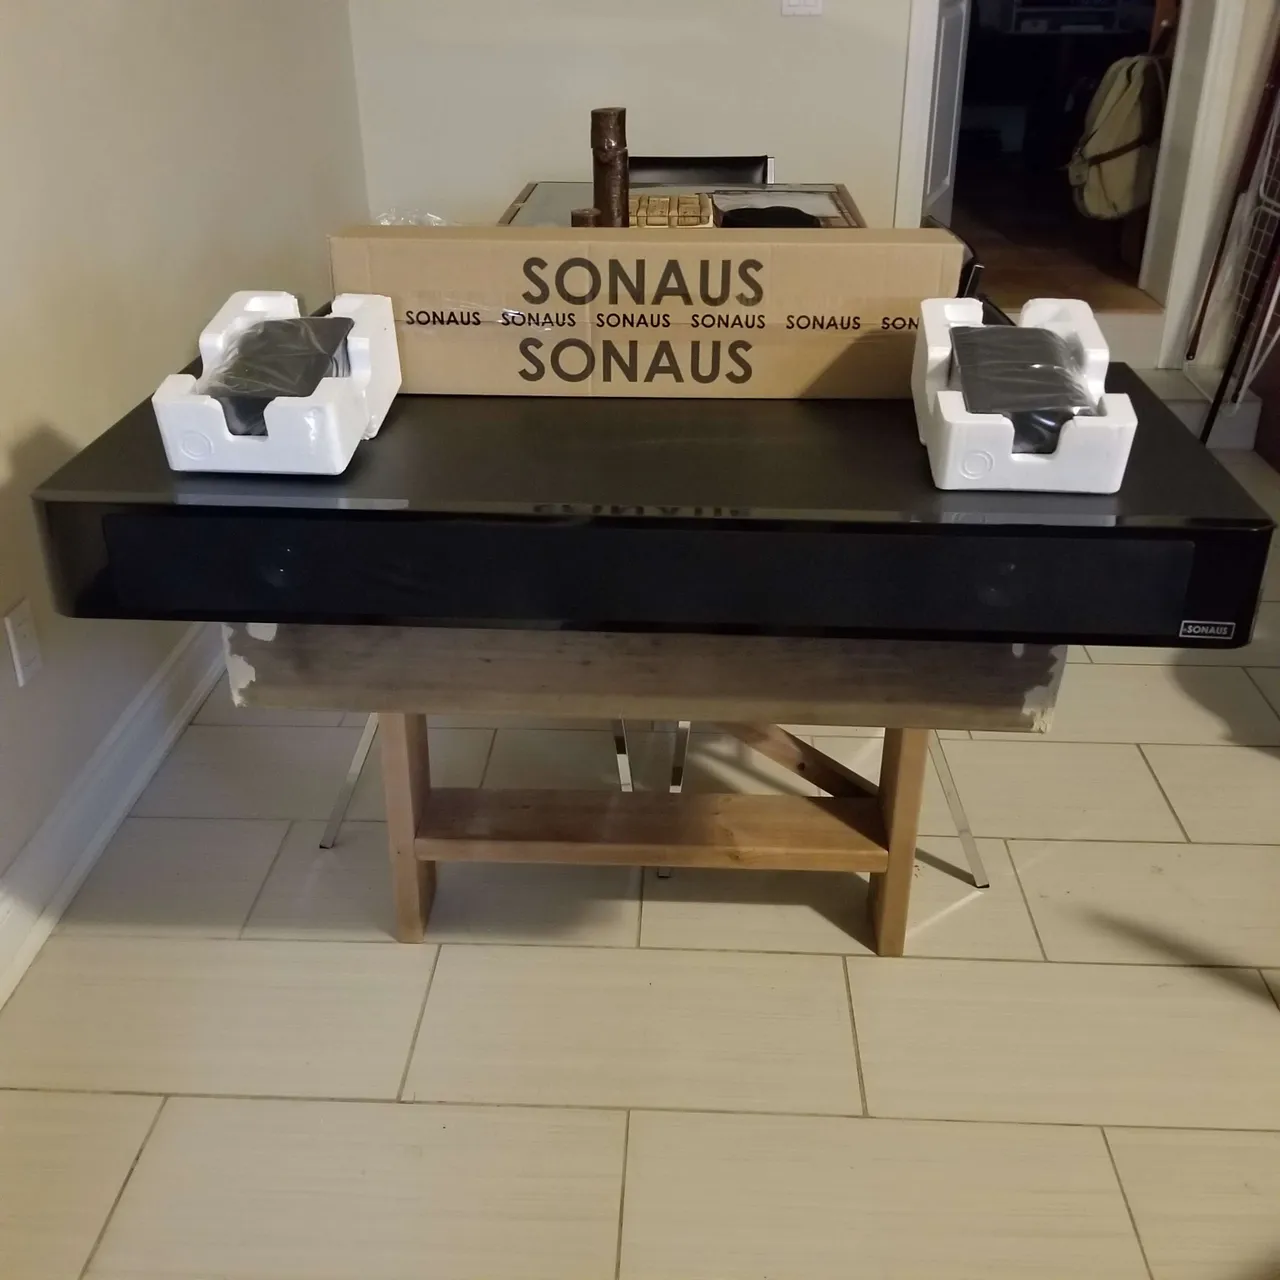 **SONAUS 4K-52**DIGITAL HOME THEATER for sale - $1000 photo 4